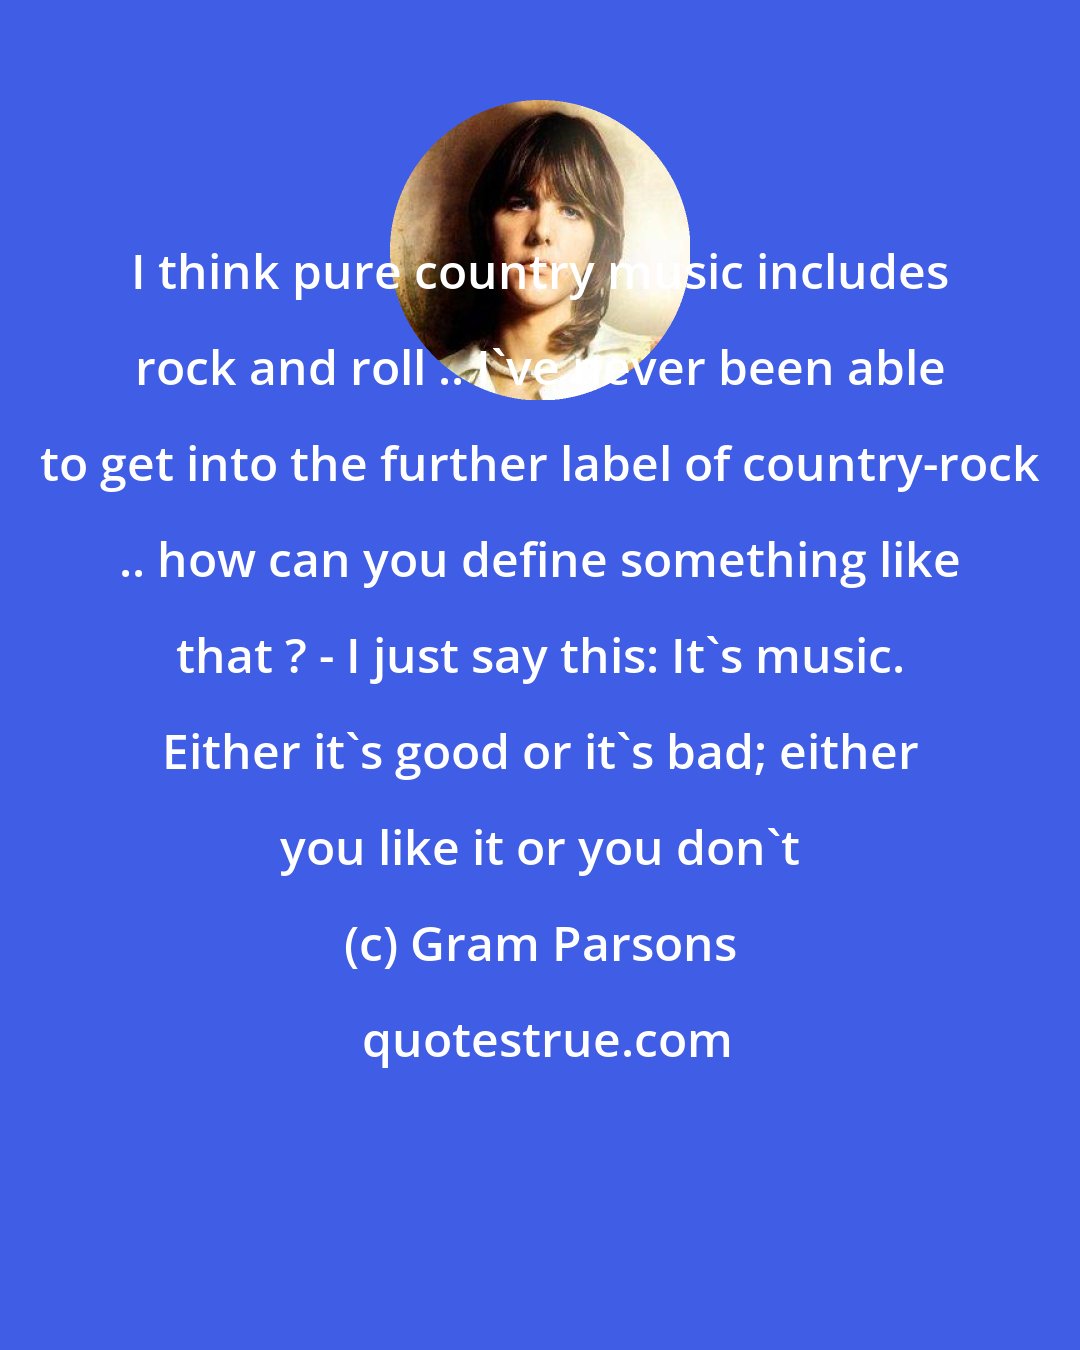 Gram Parsons: I think pure country music includes rock and roll .. I've never been able to get into the further label of country-rock .. how can you define something like that ? - I just say this: It's music. Either it's good or it's bad; either you like it or you don't